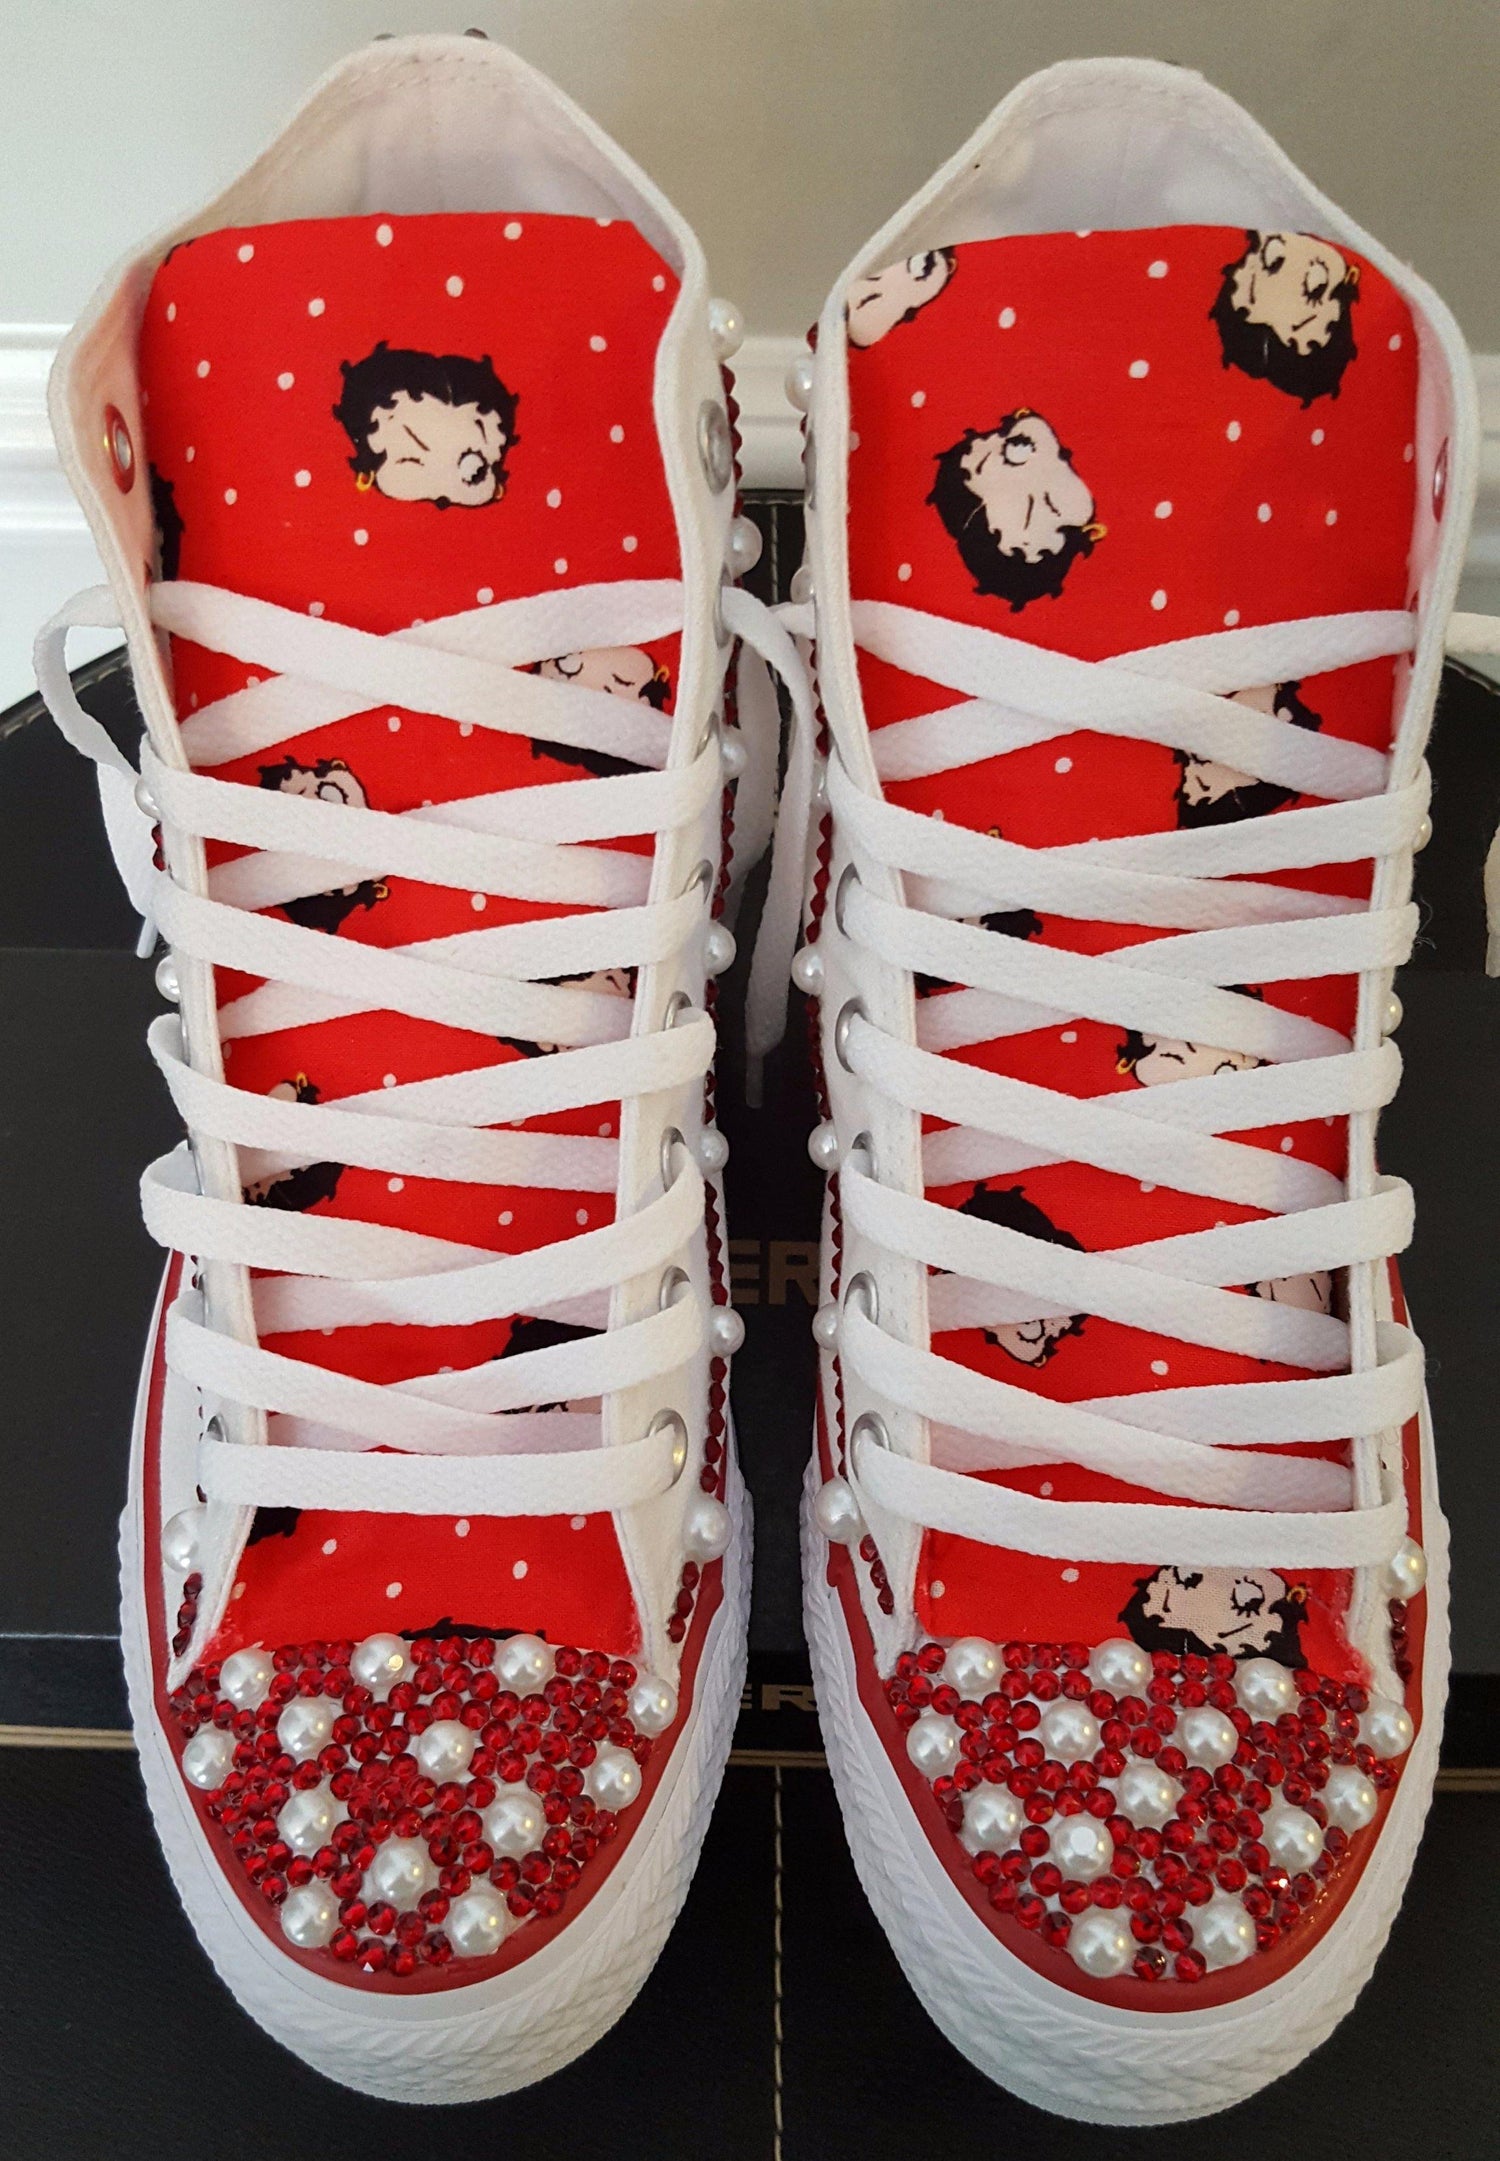 Bedazzled BETTY BOOP High-Top ALL STAR Converses- Special Edition